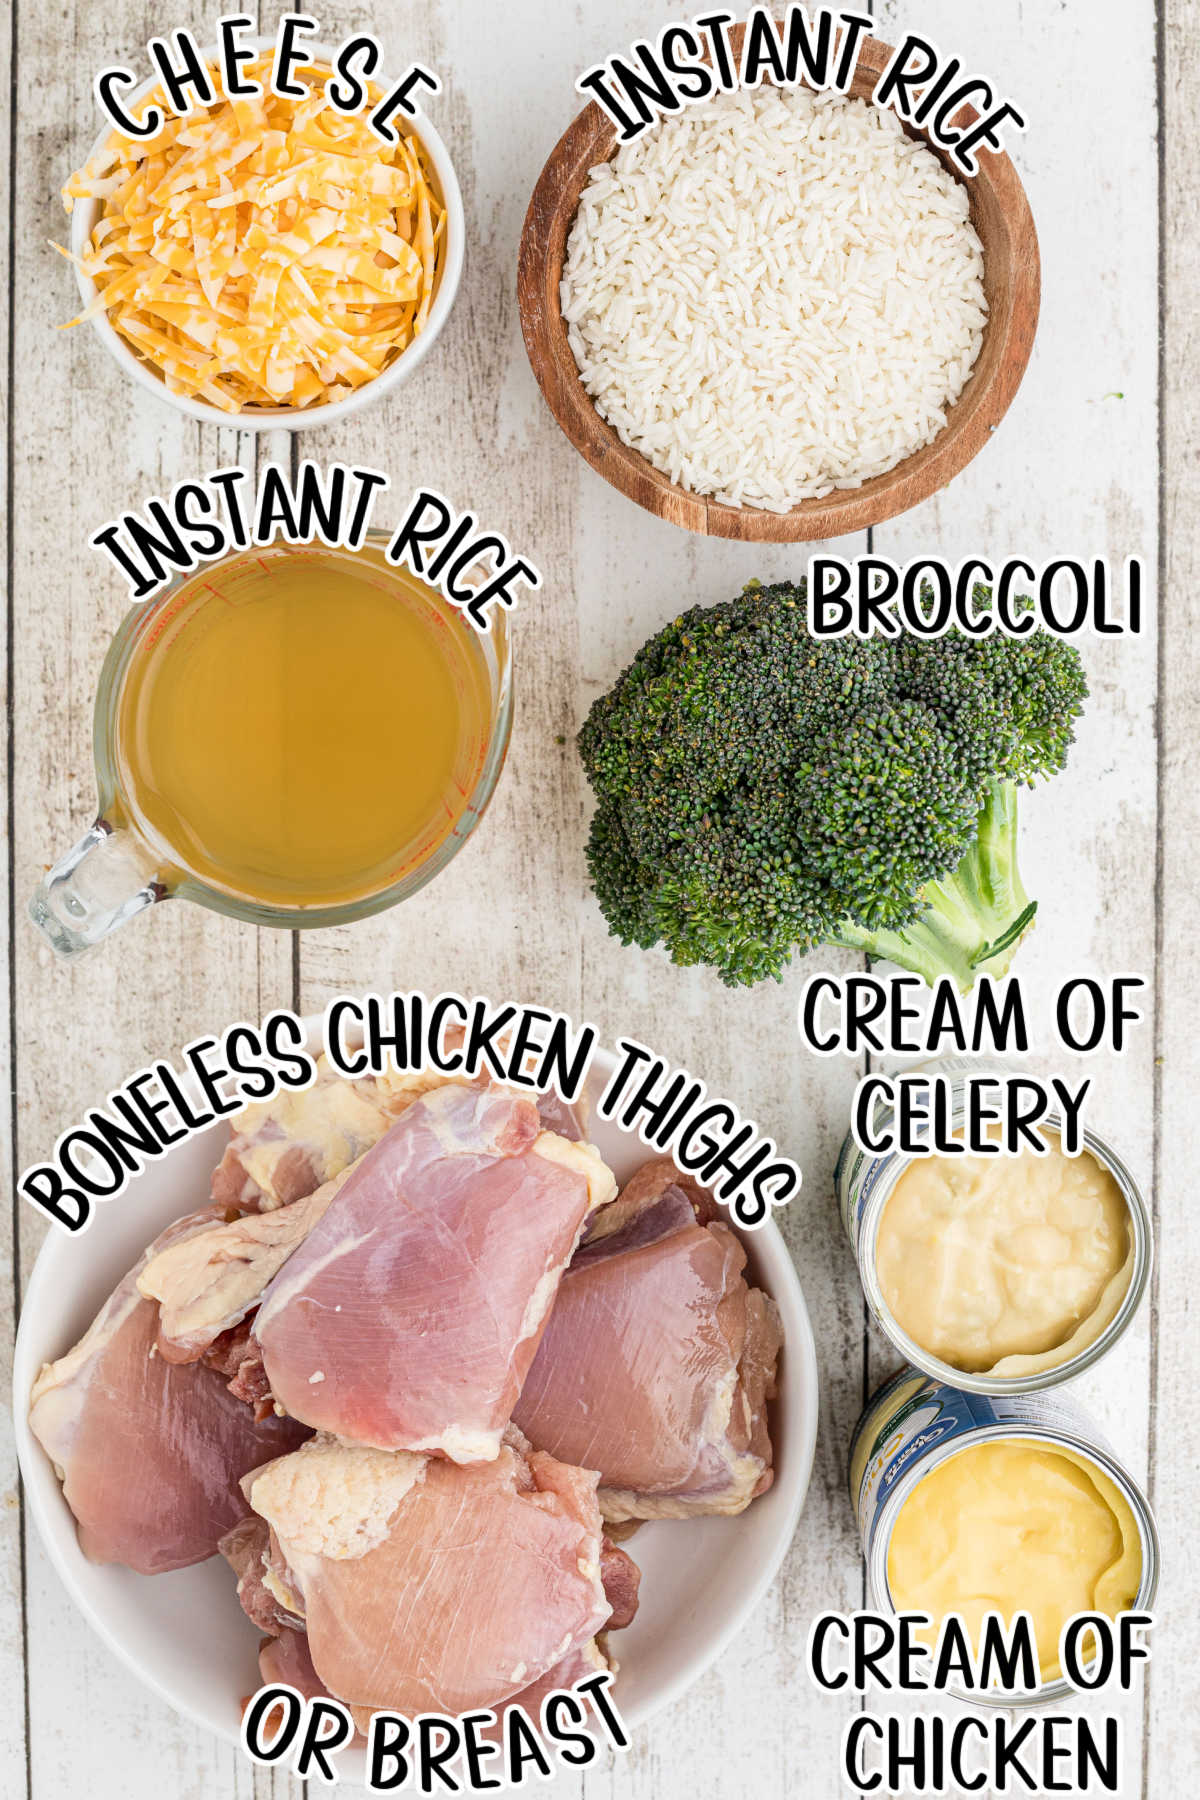 Labeled ingredients for chicken broccoli and rice casserole